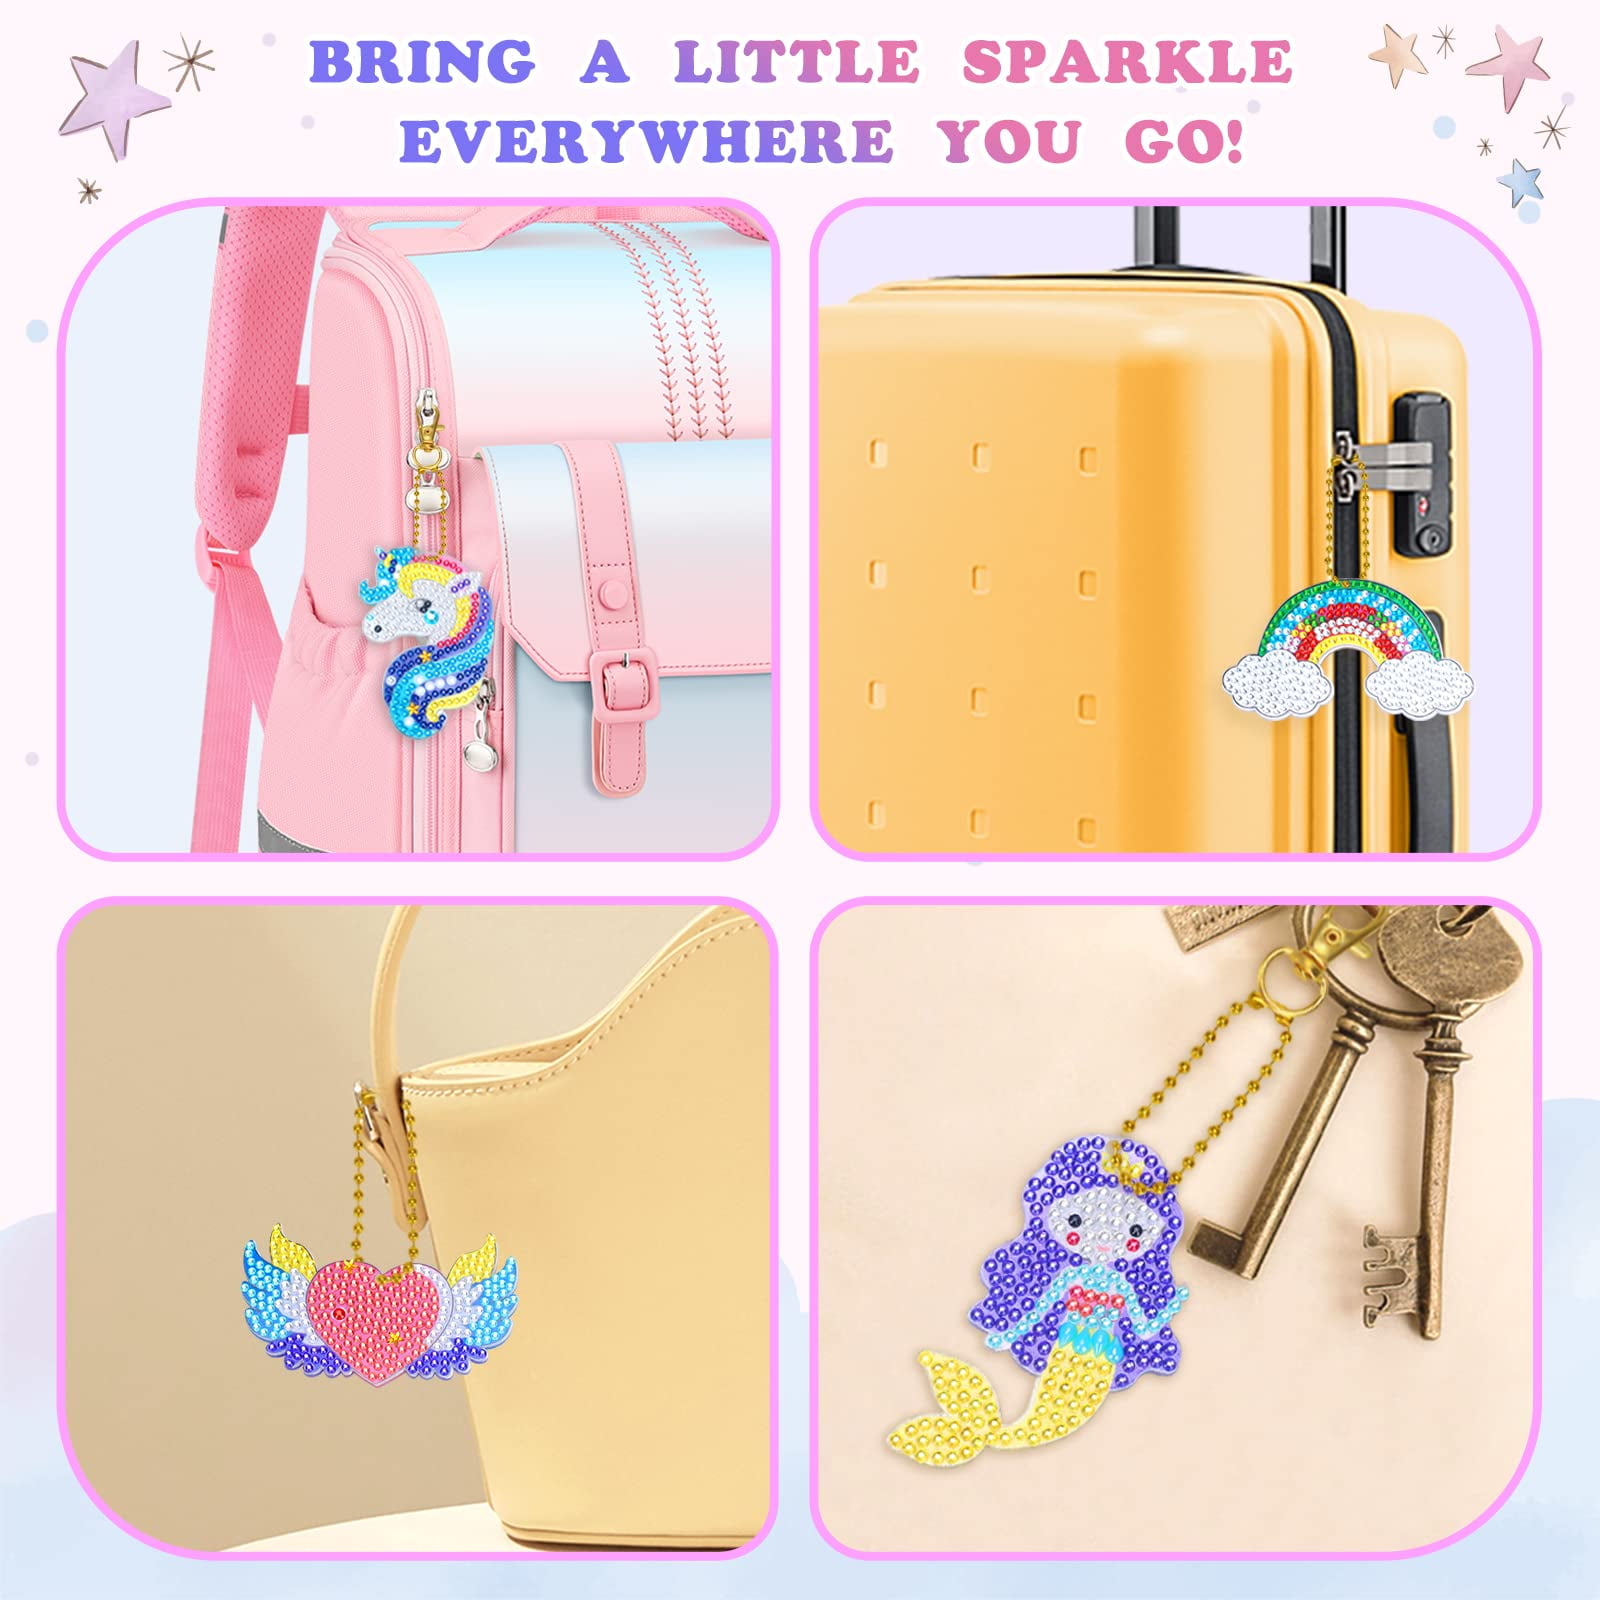 Indi & Dash Co - Get the girls in your life this cute DIY keychain kit.  Keychain colors may vary. #diyforkids#girlsdaygifts#supportlocalbusiness